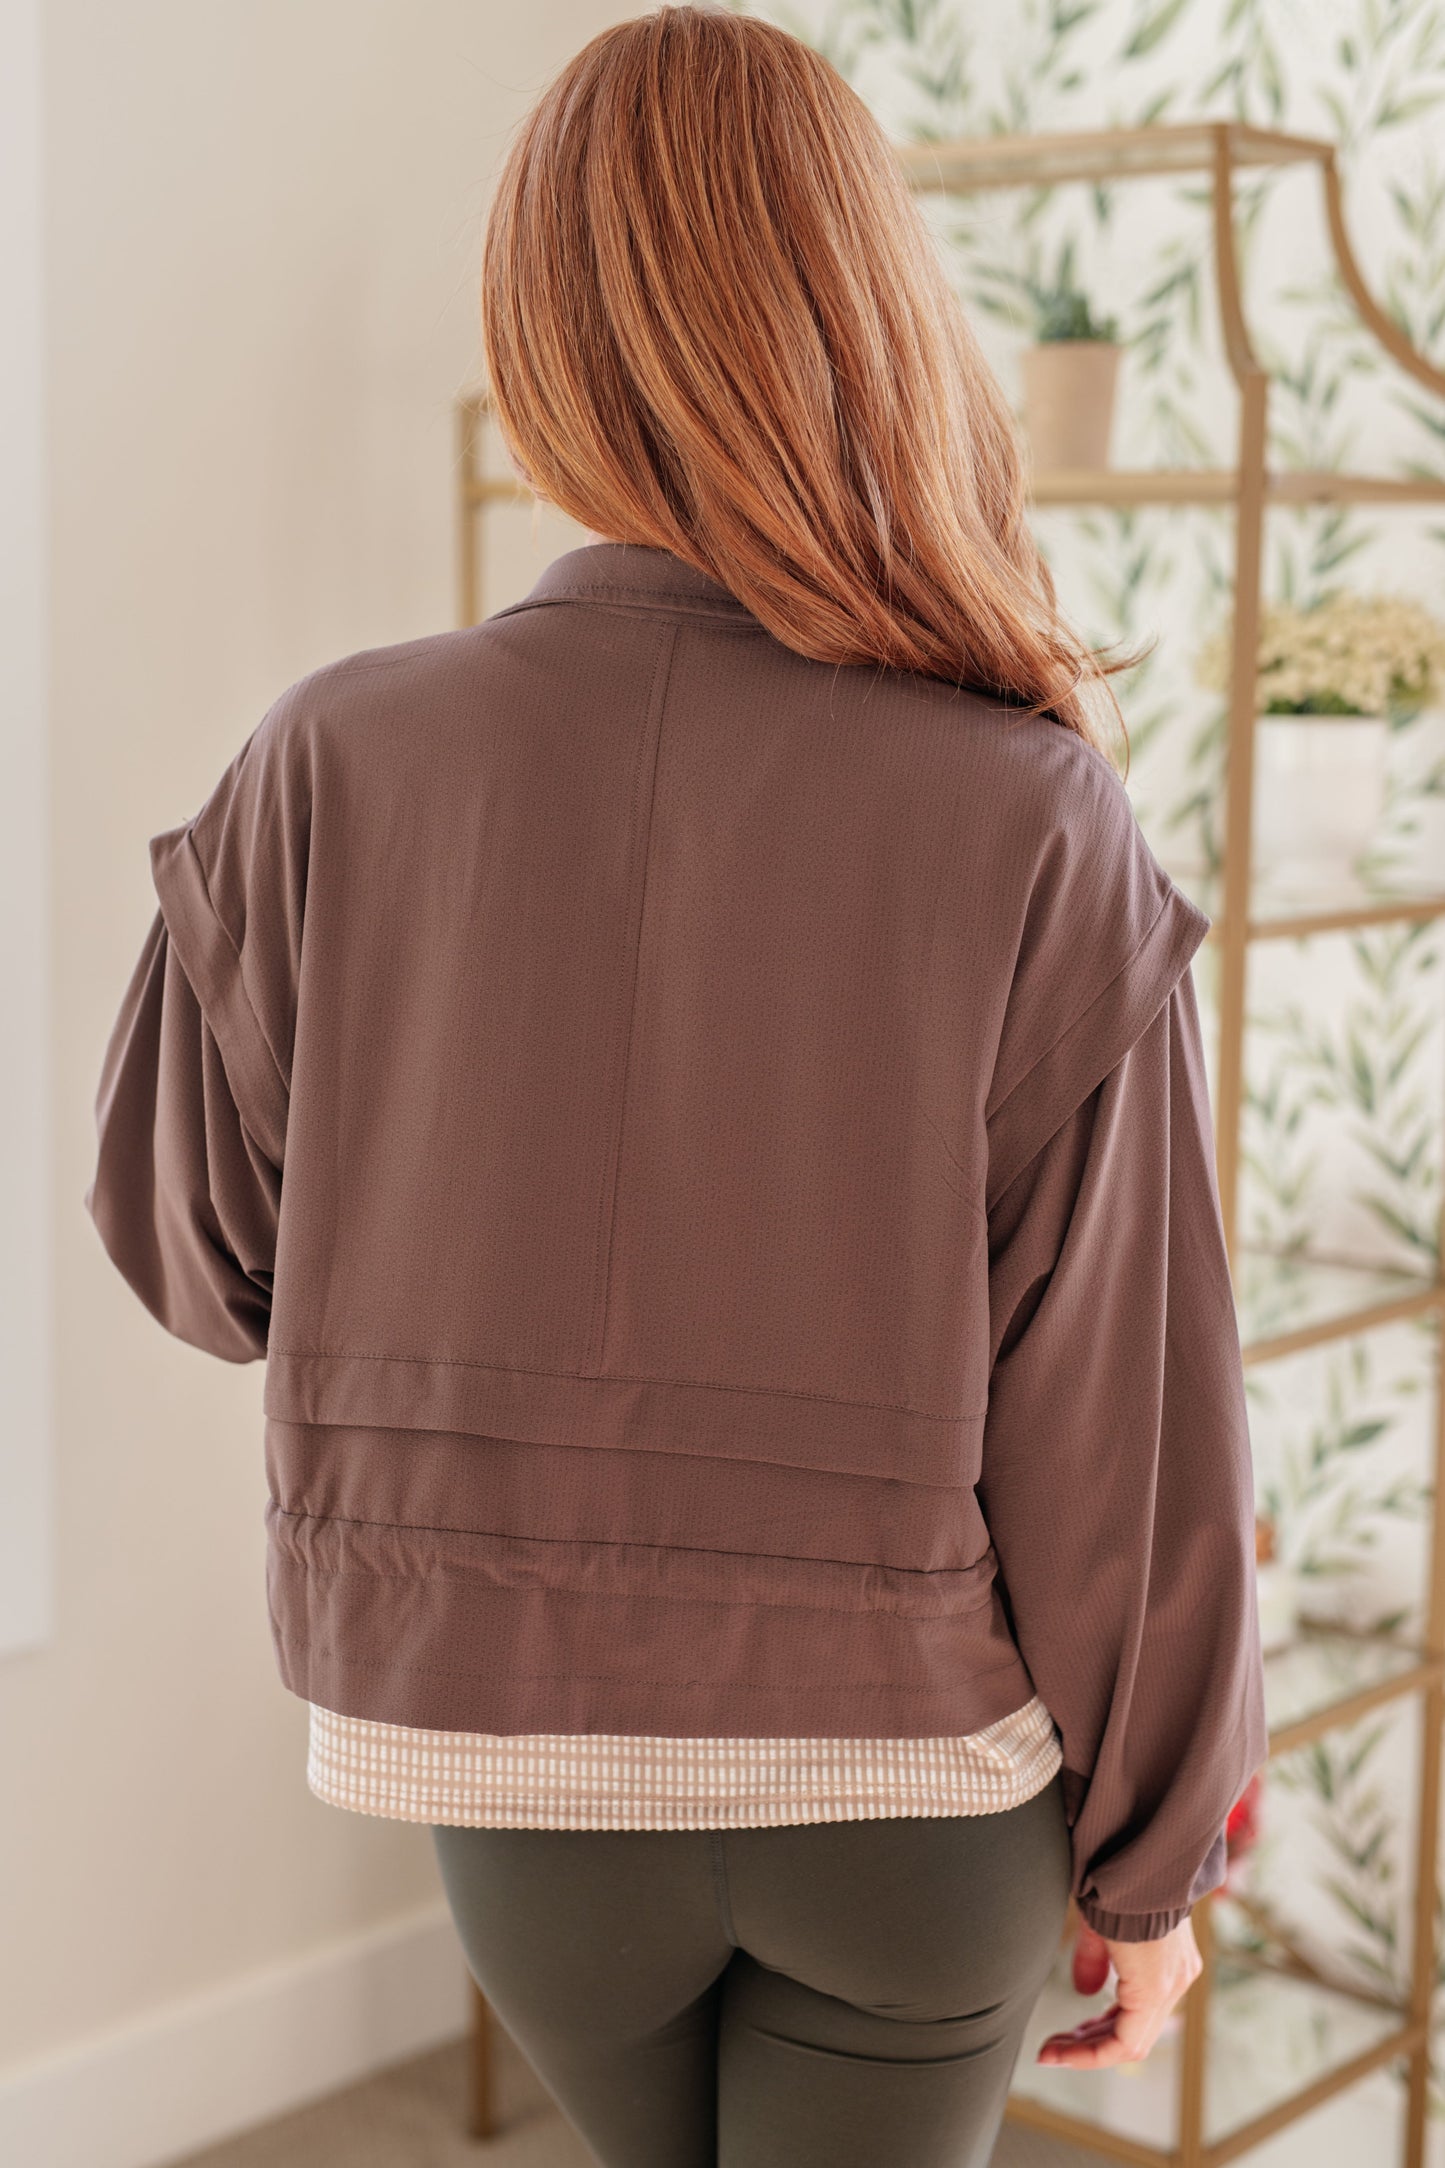 She's Got Game Cropped Jacket in Brown (Online Exclusive)